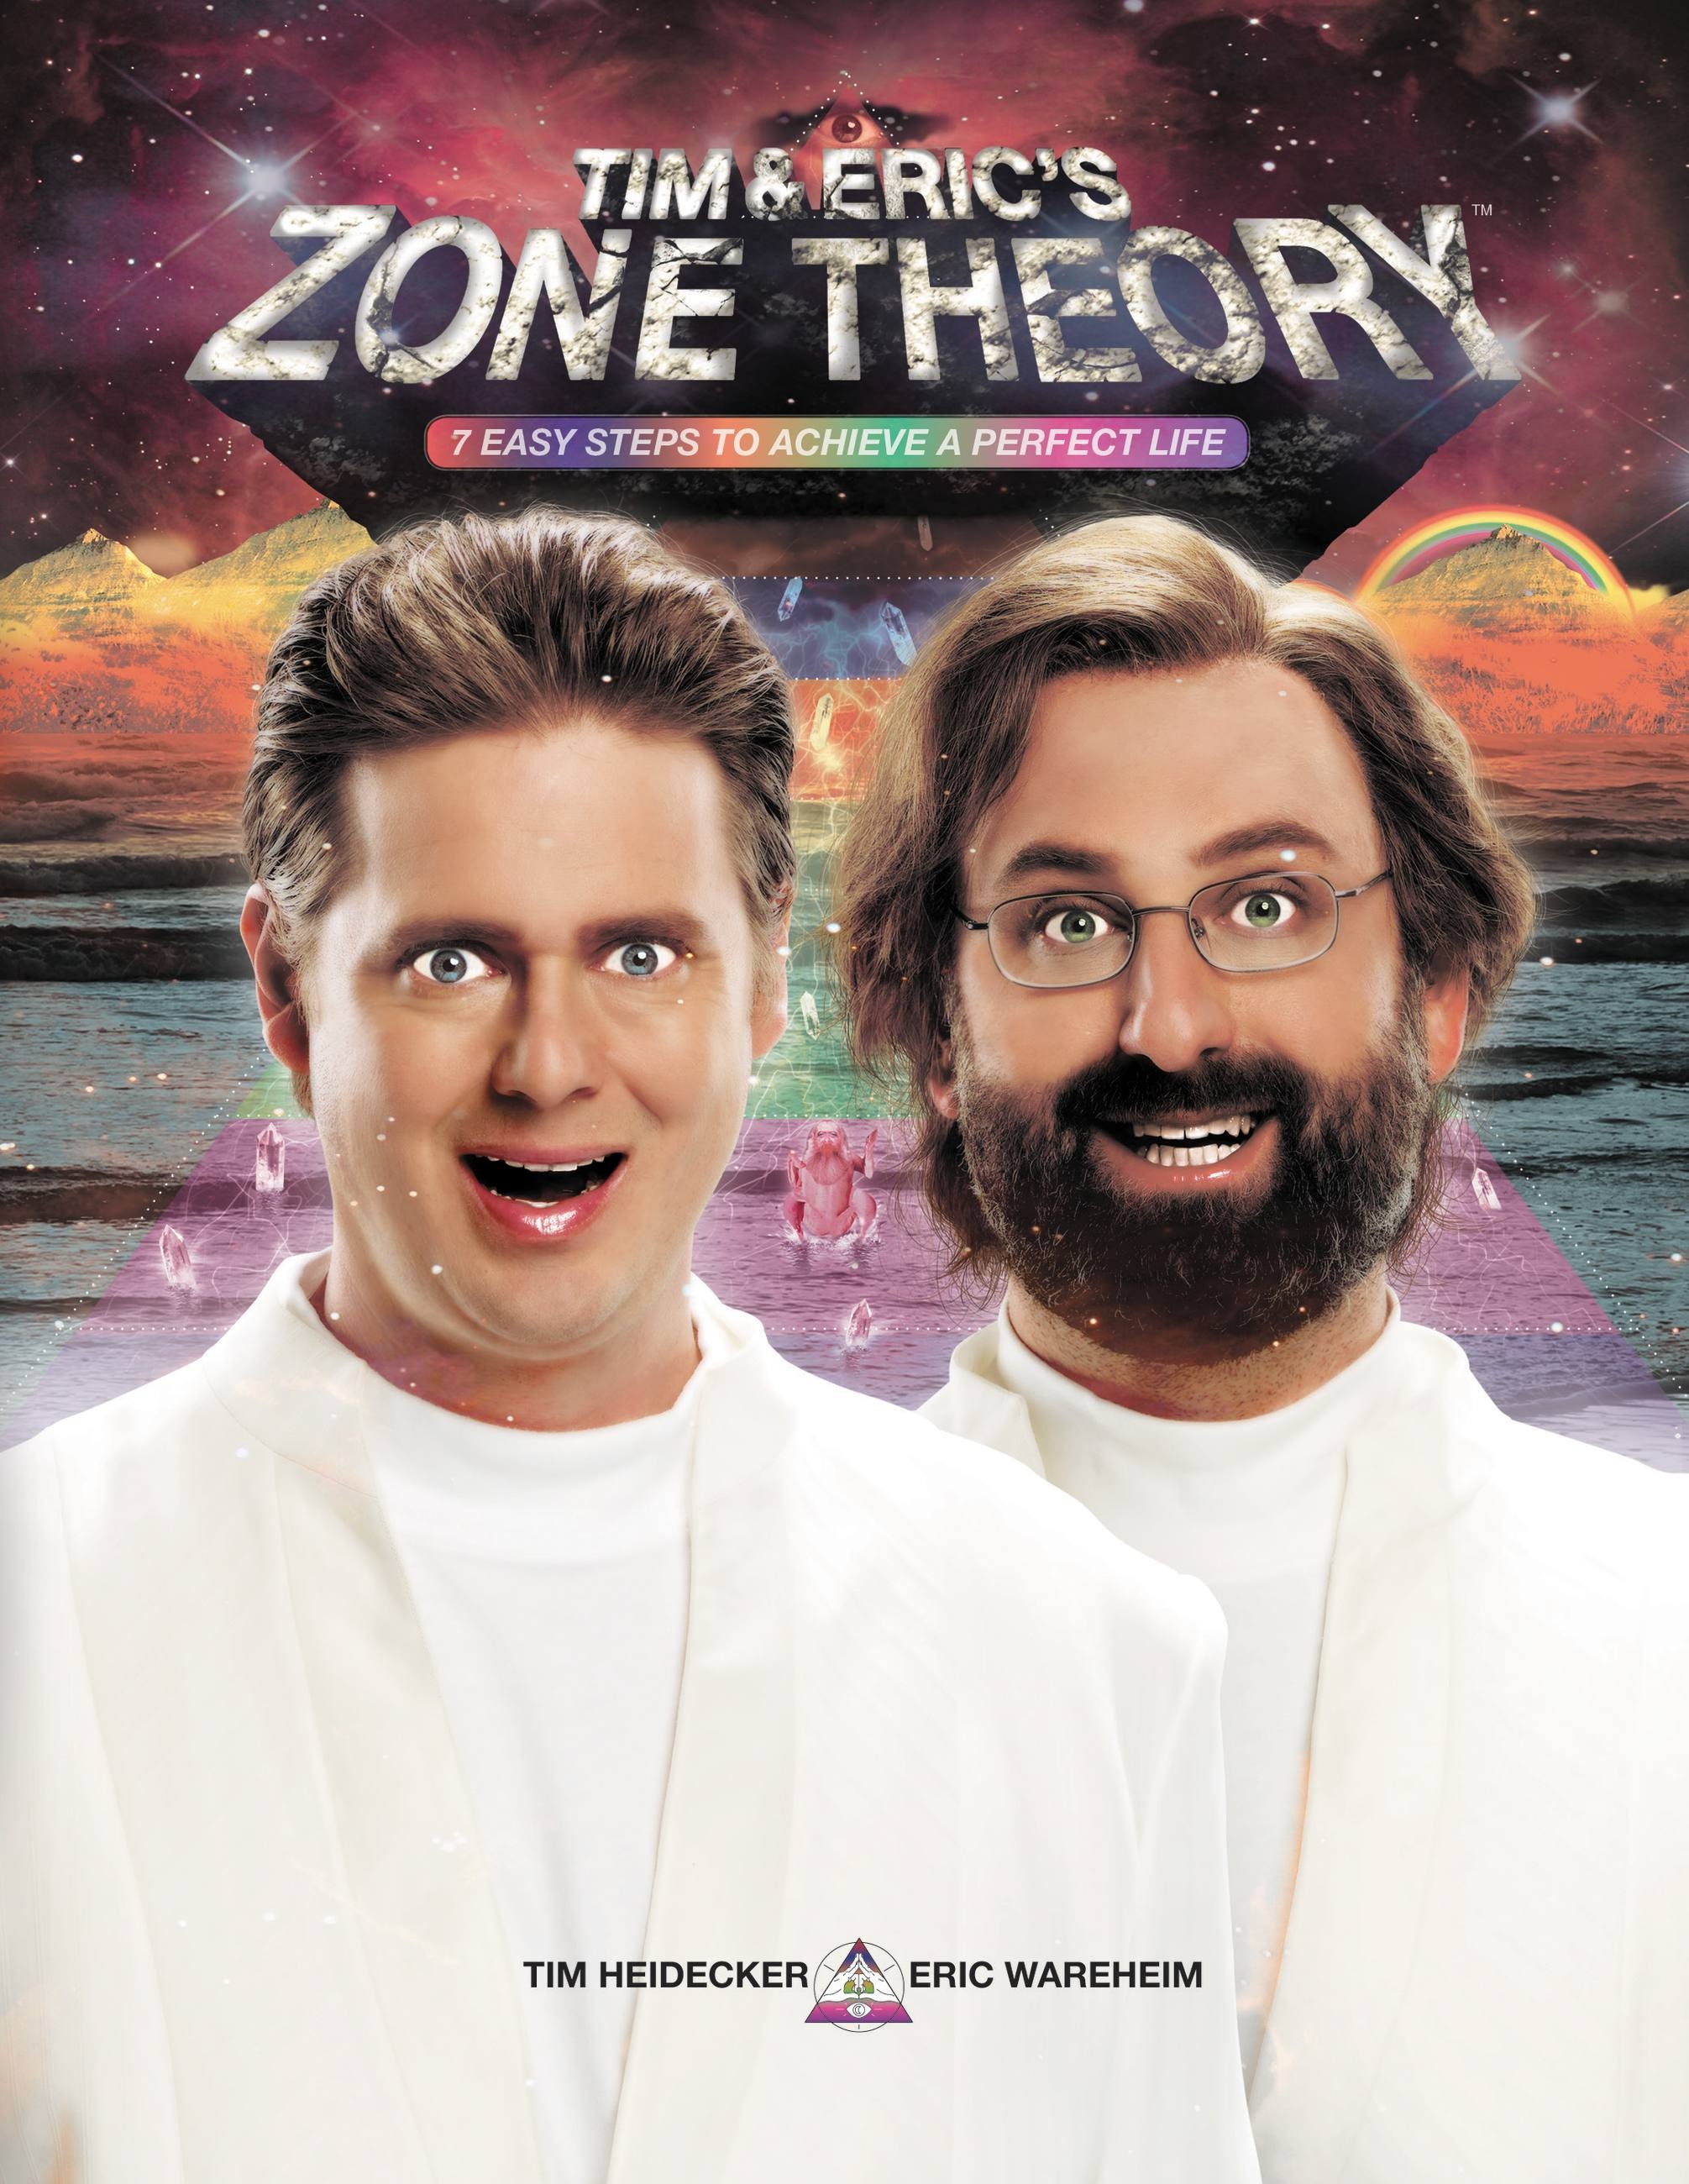 and Eric's Zone Theory by Tim Heidecker | Hachette Book Group